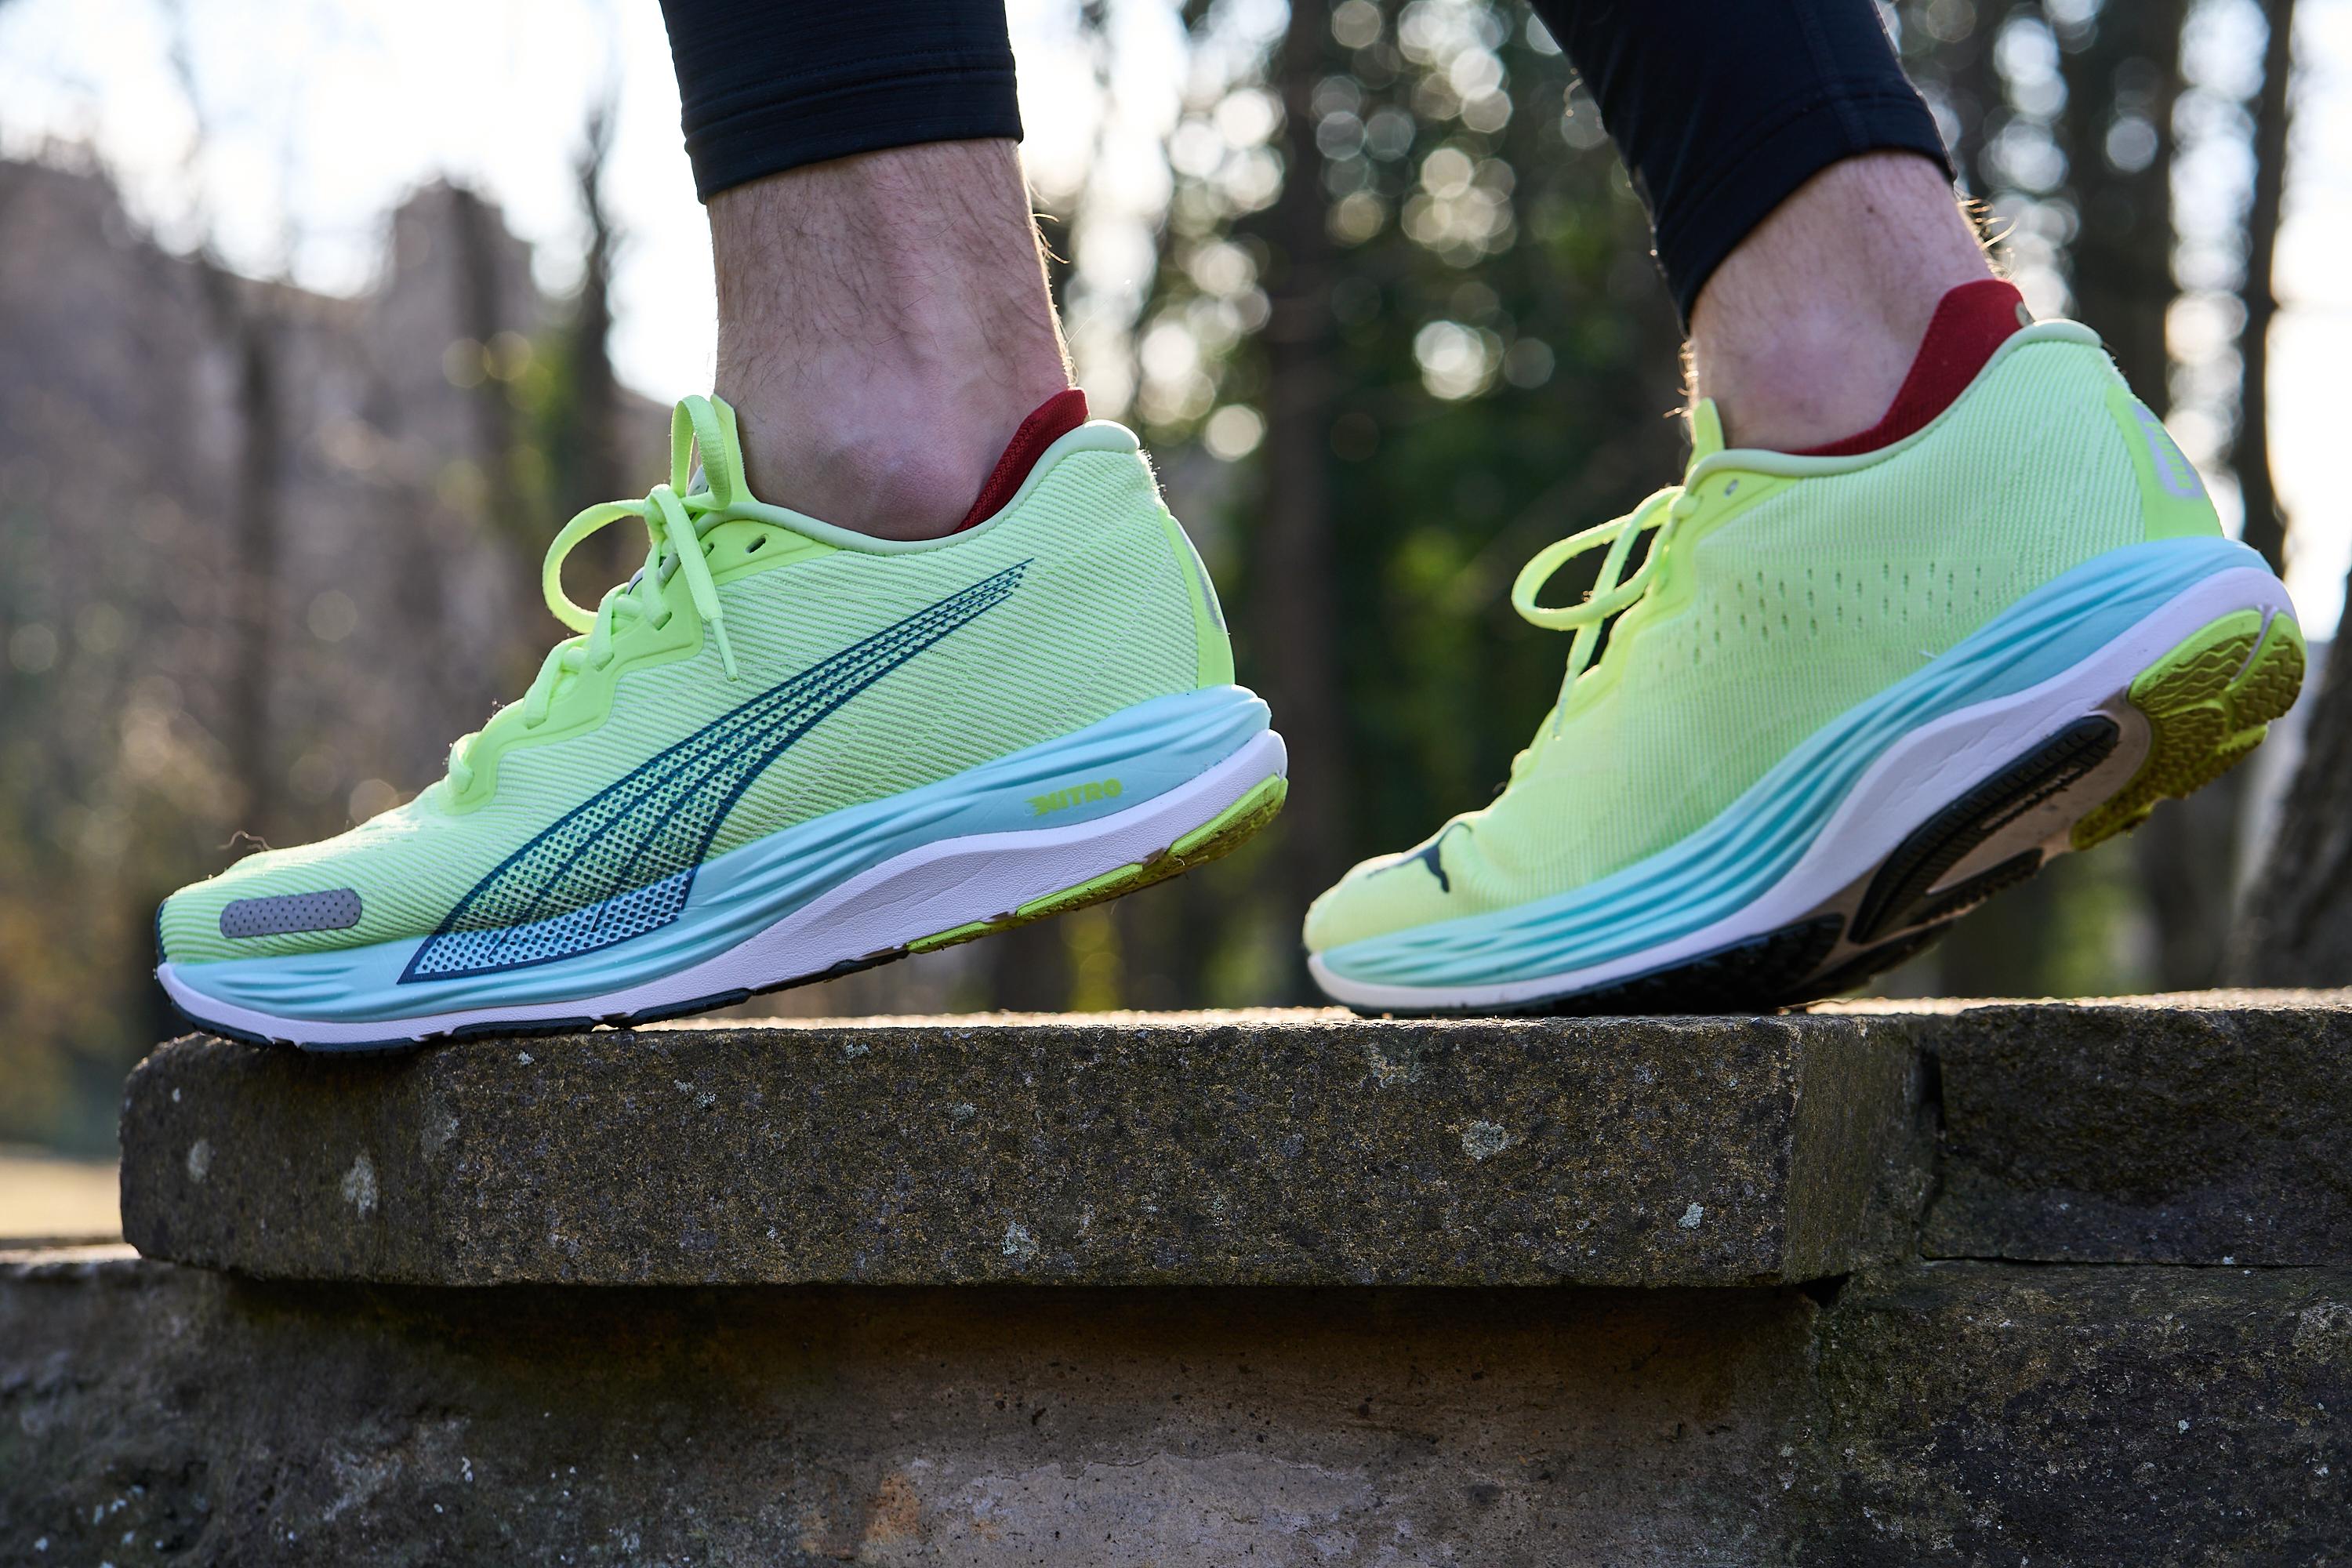 Test: Puma Velocity Nitro 2 - See the review and buy the shoe here -  Inspiration